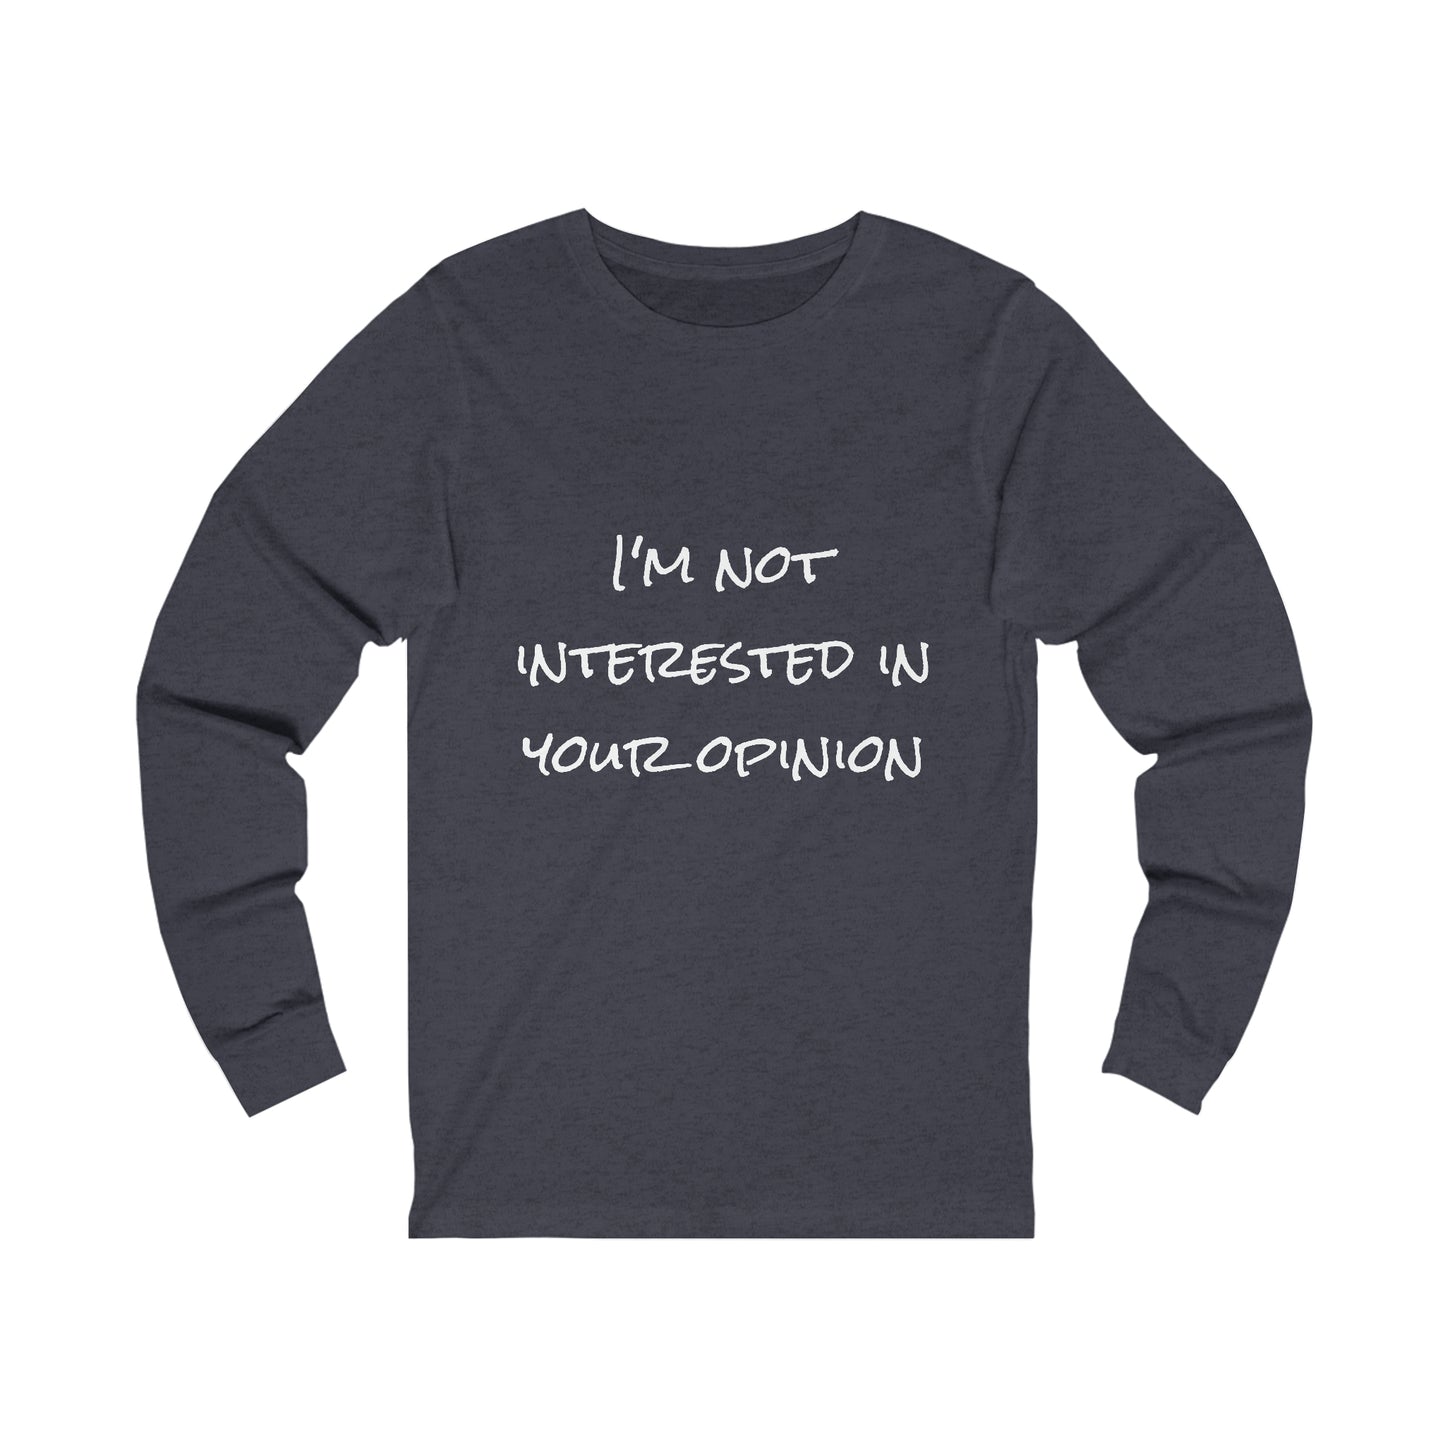 I'm Not Interested in Your Opinion - Unisex Jersey Long Sleeve Tee